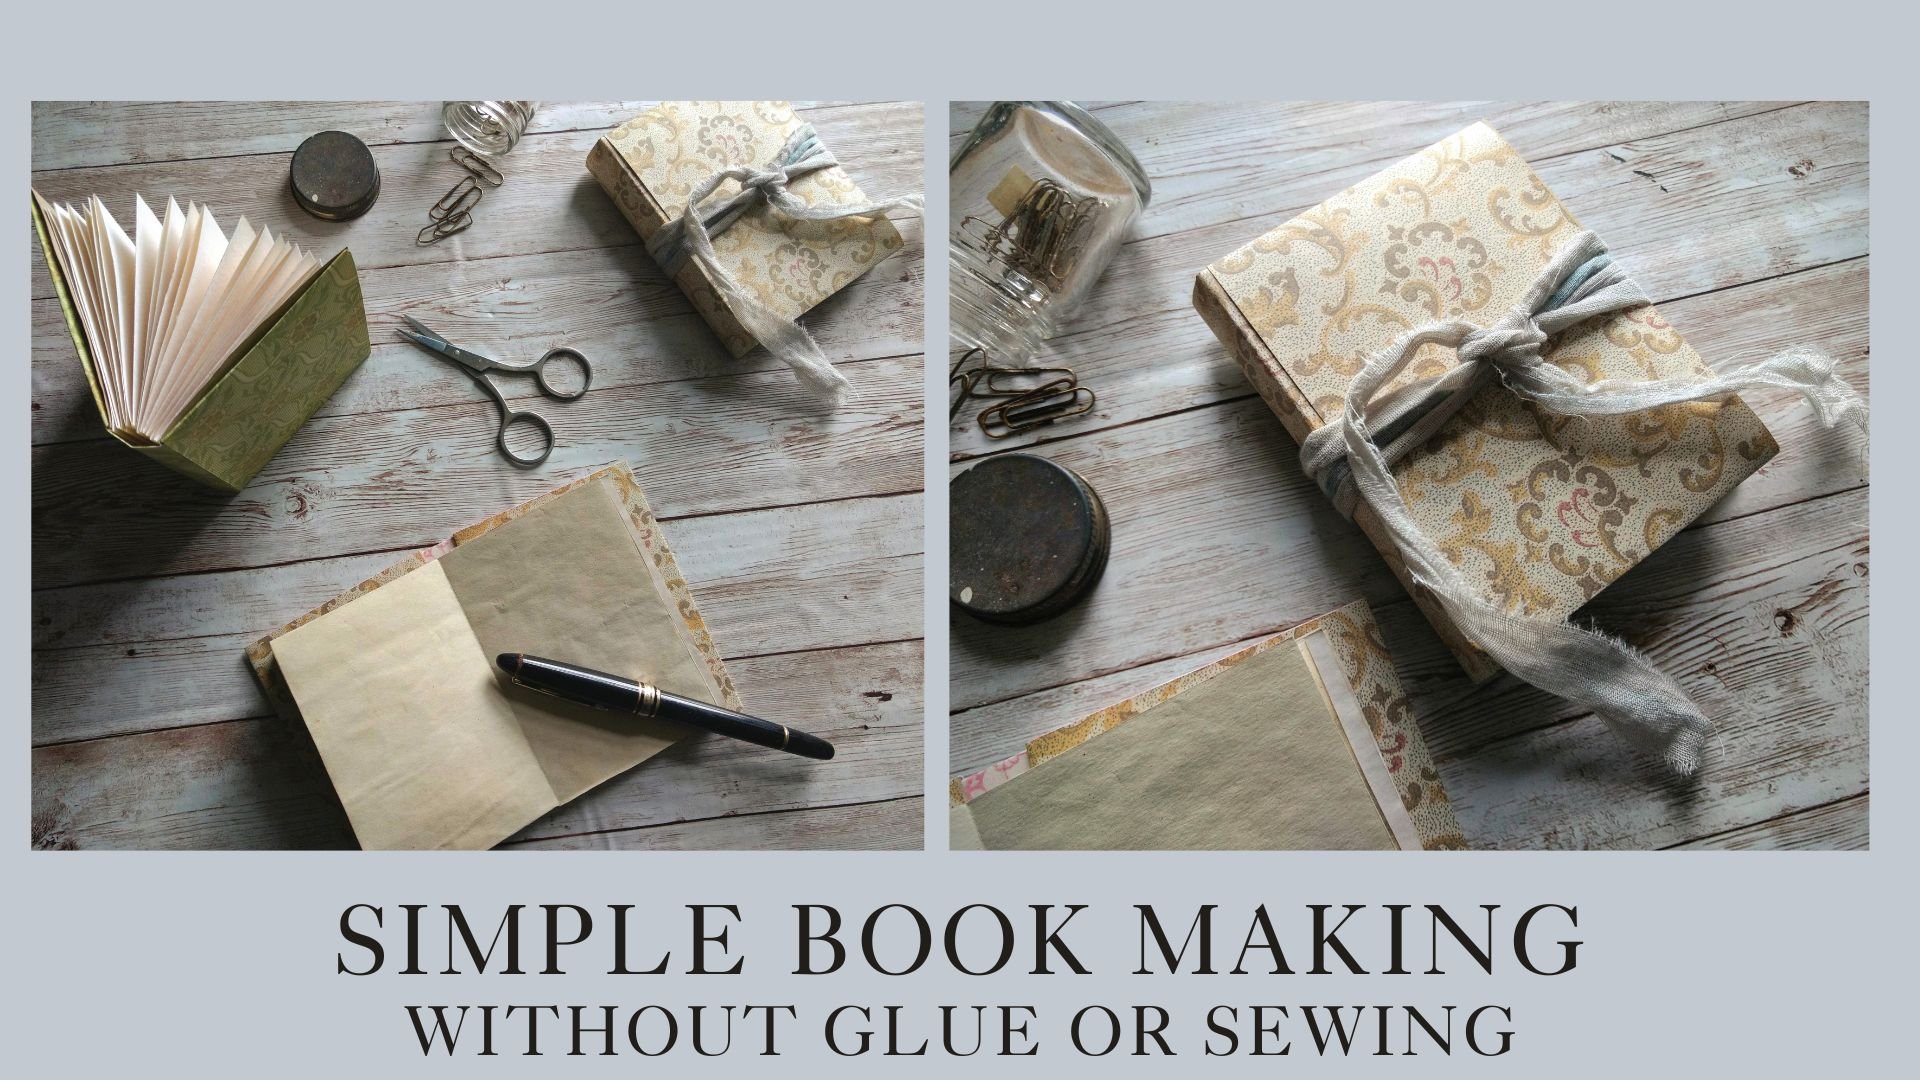 Simple Book Making - without Glue or Sewing